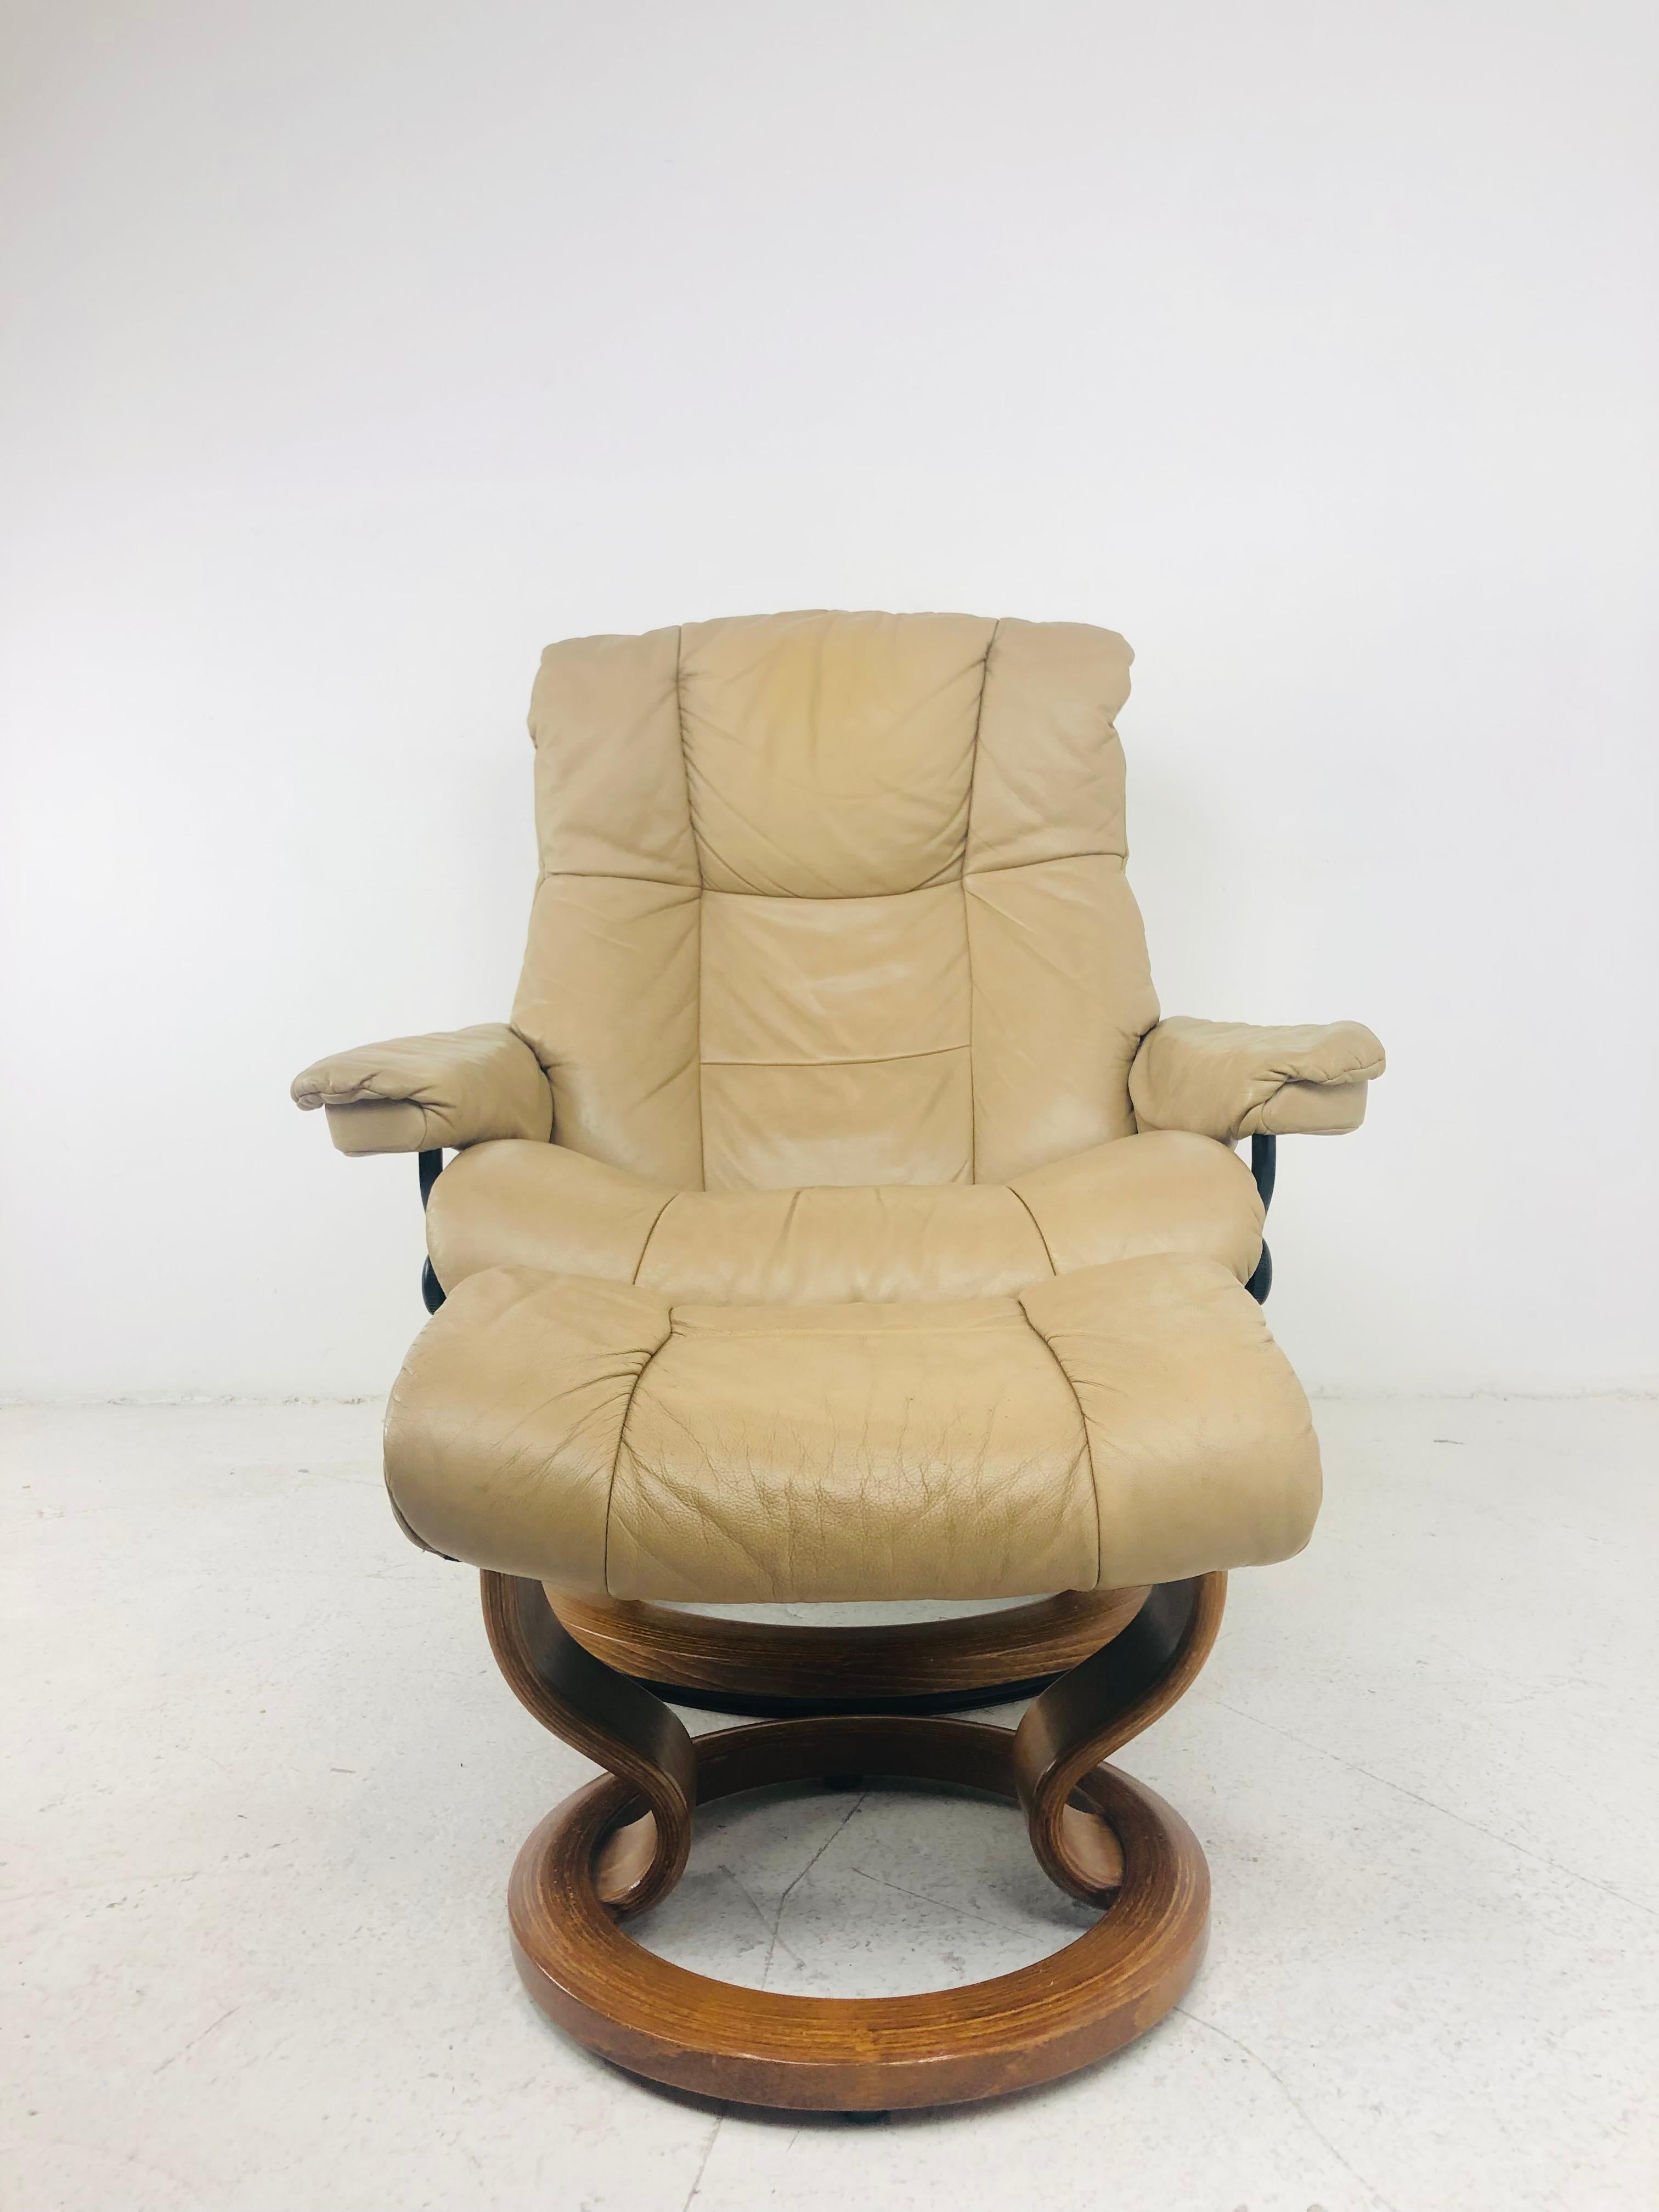 stressless chairs canada price